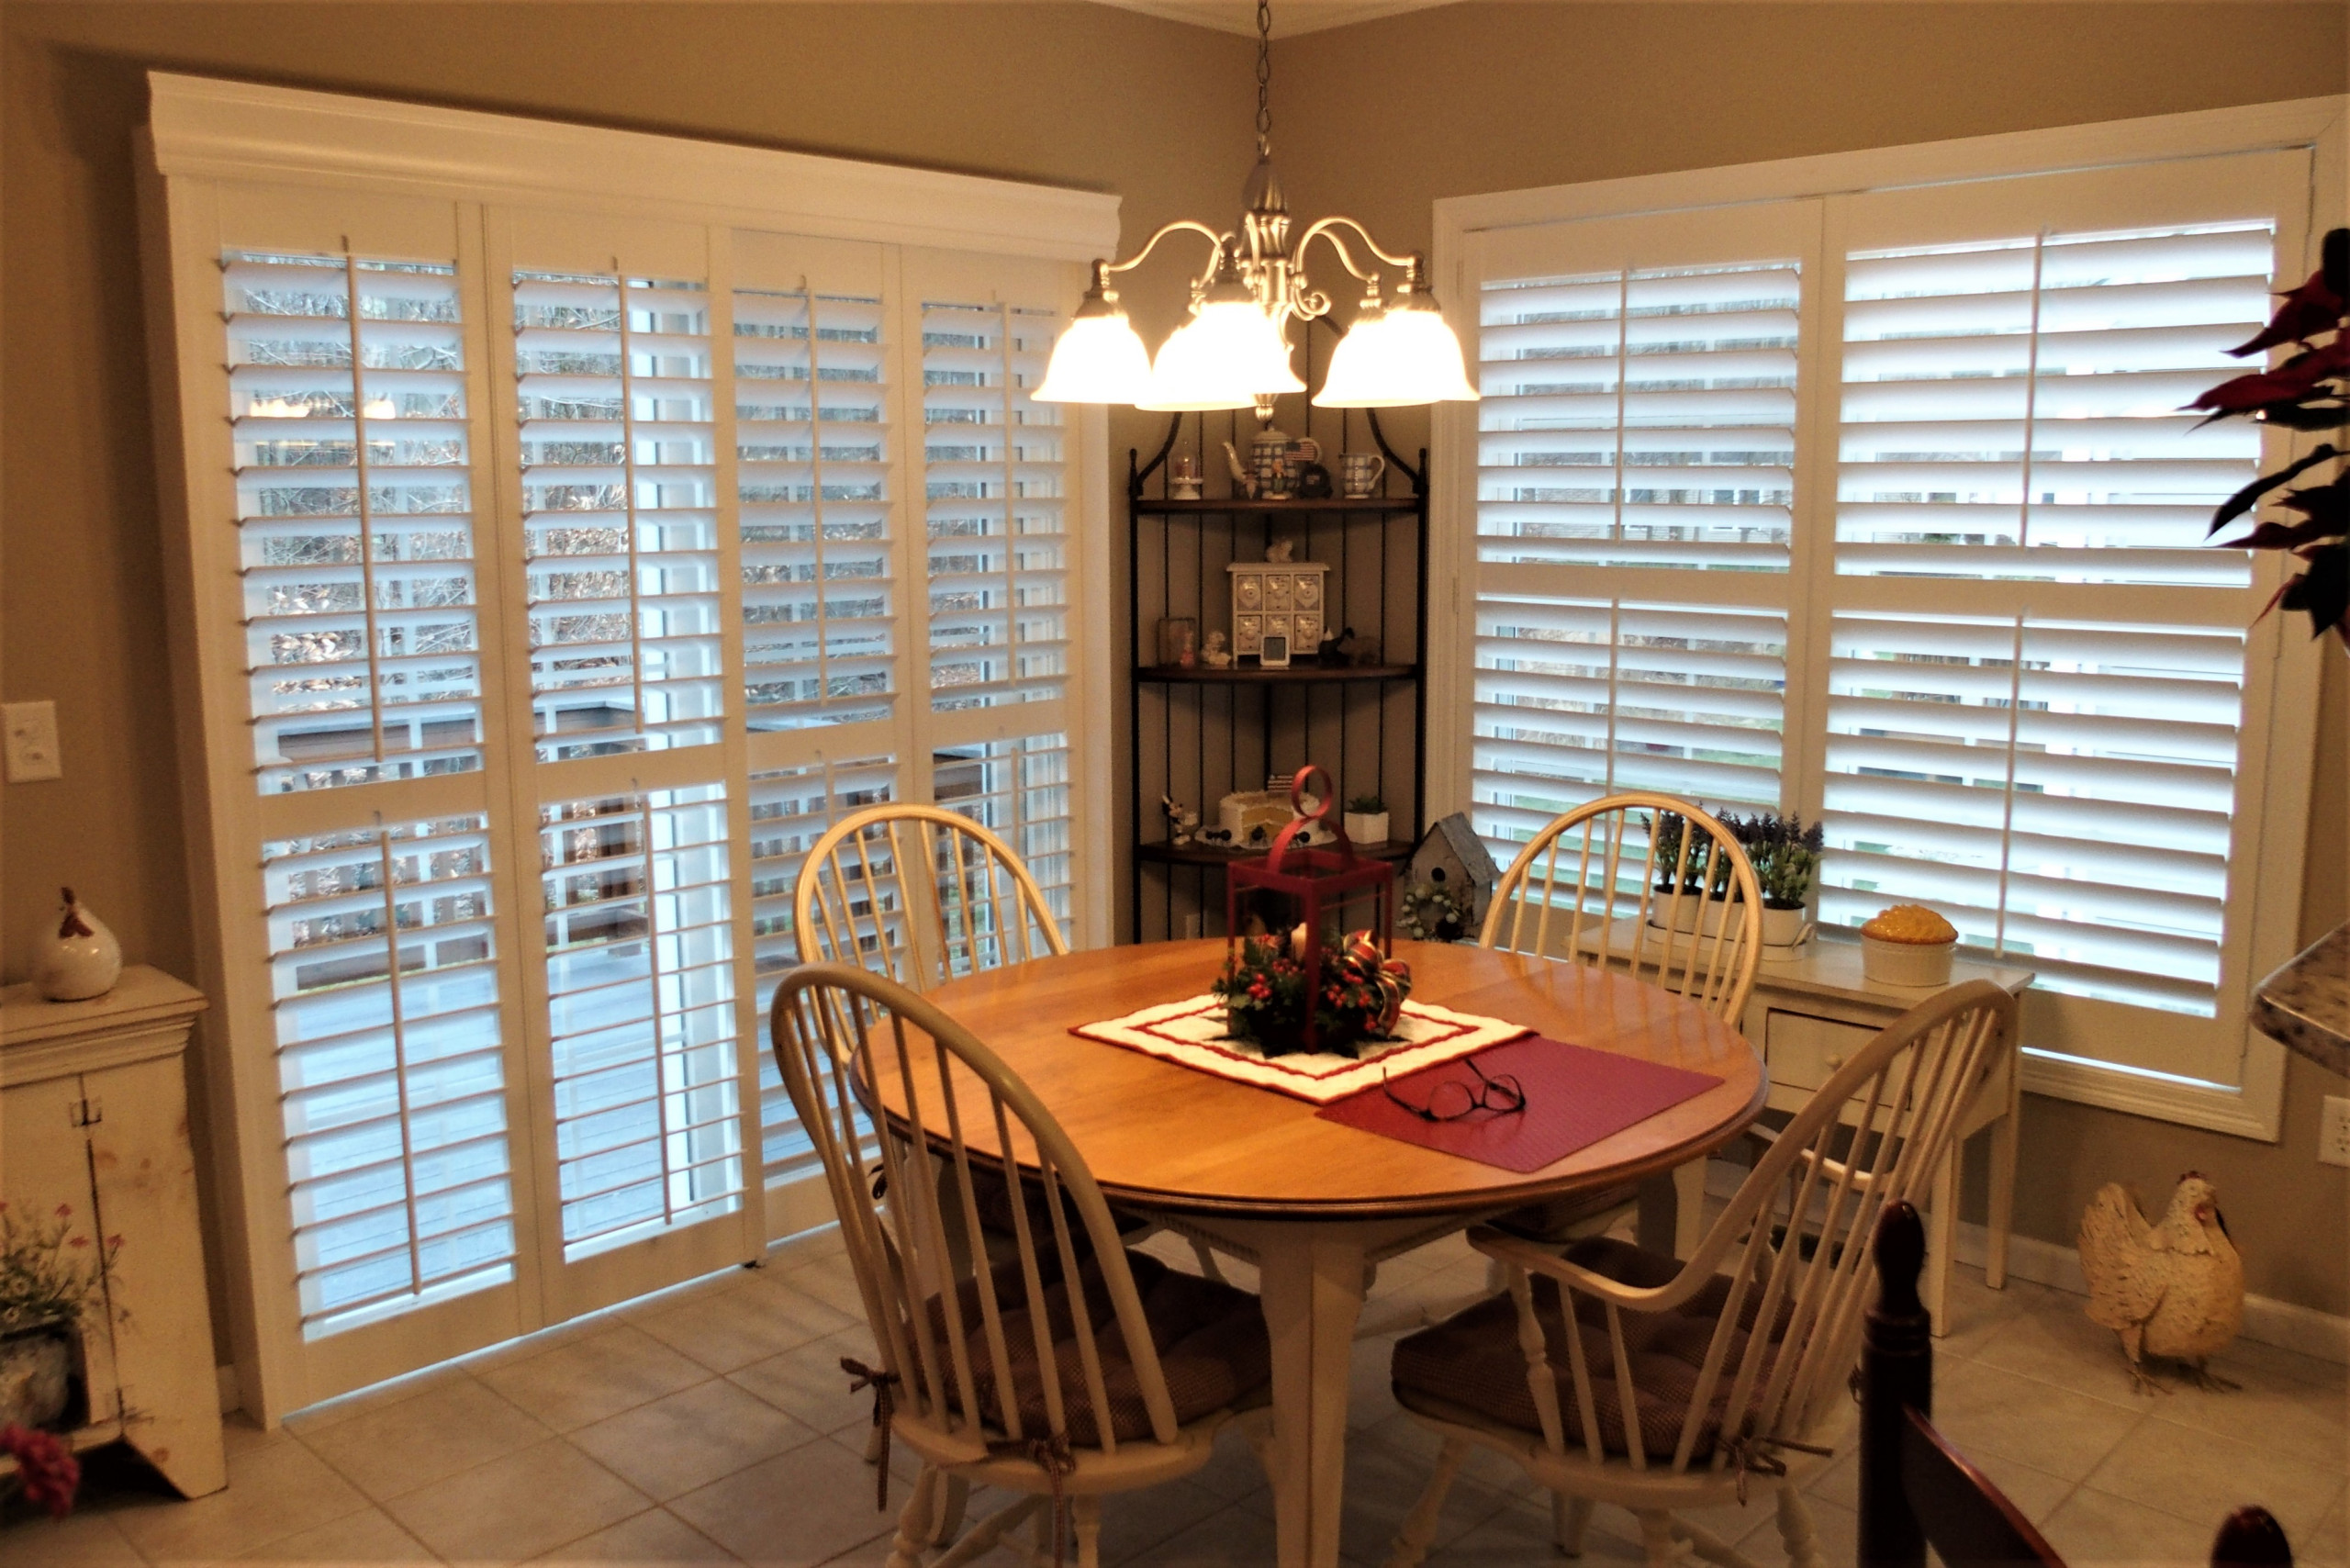 Hunter Douglas New Style Shutters for a Whole House